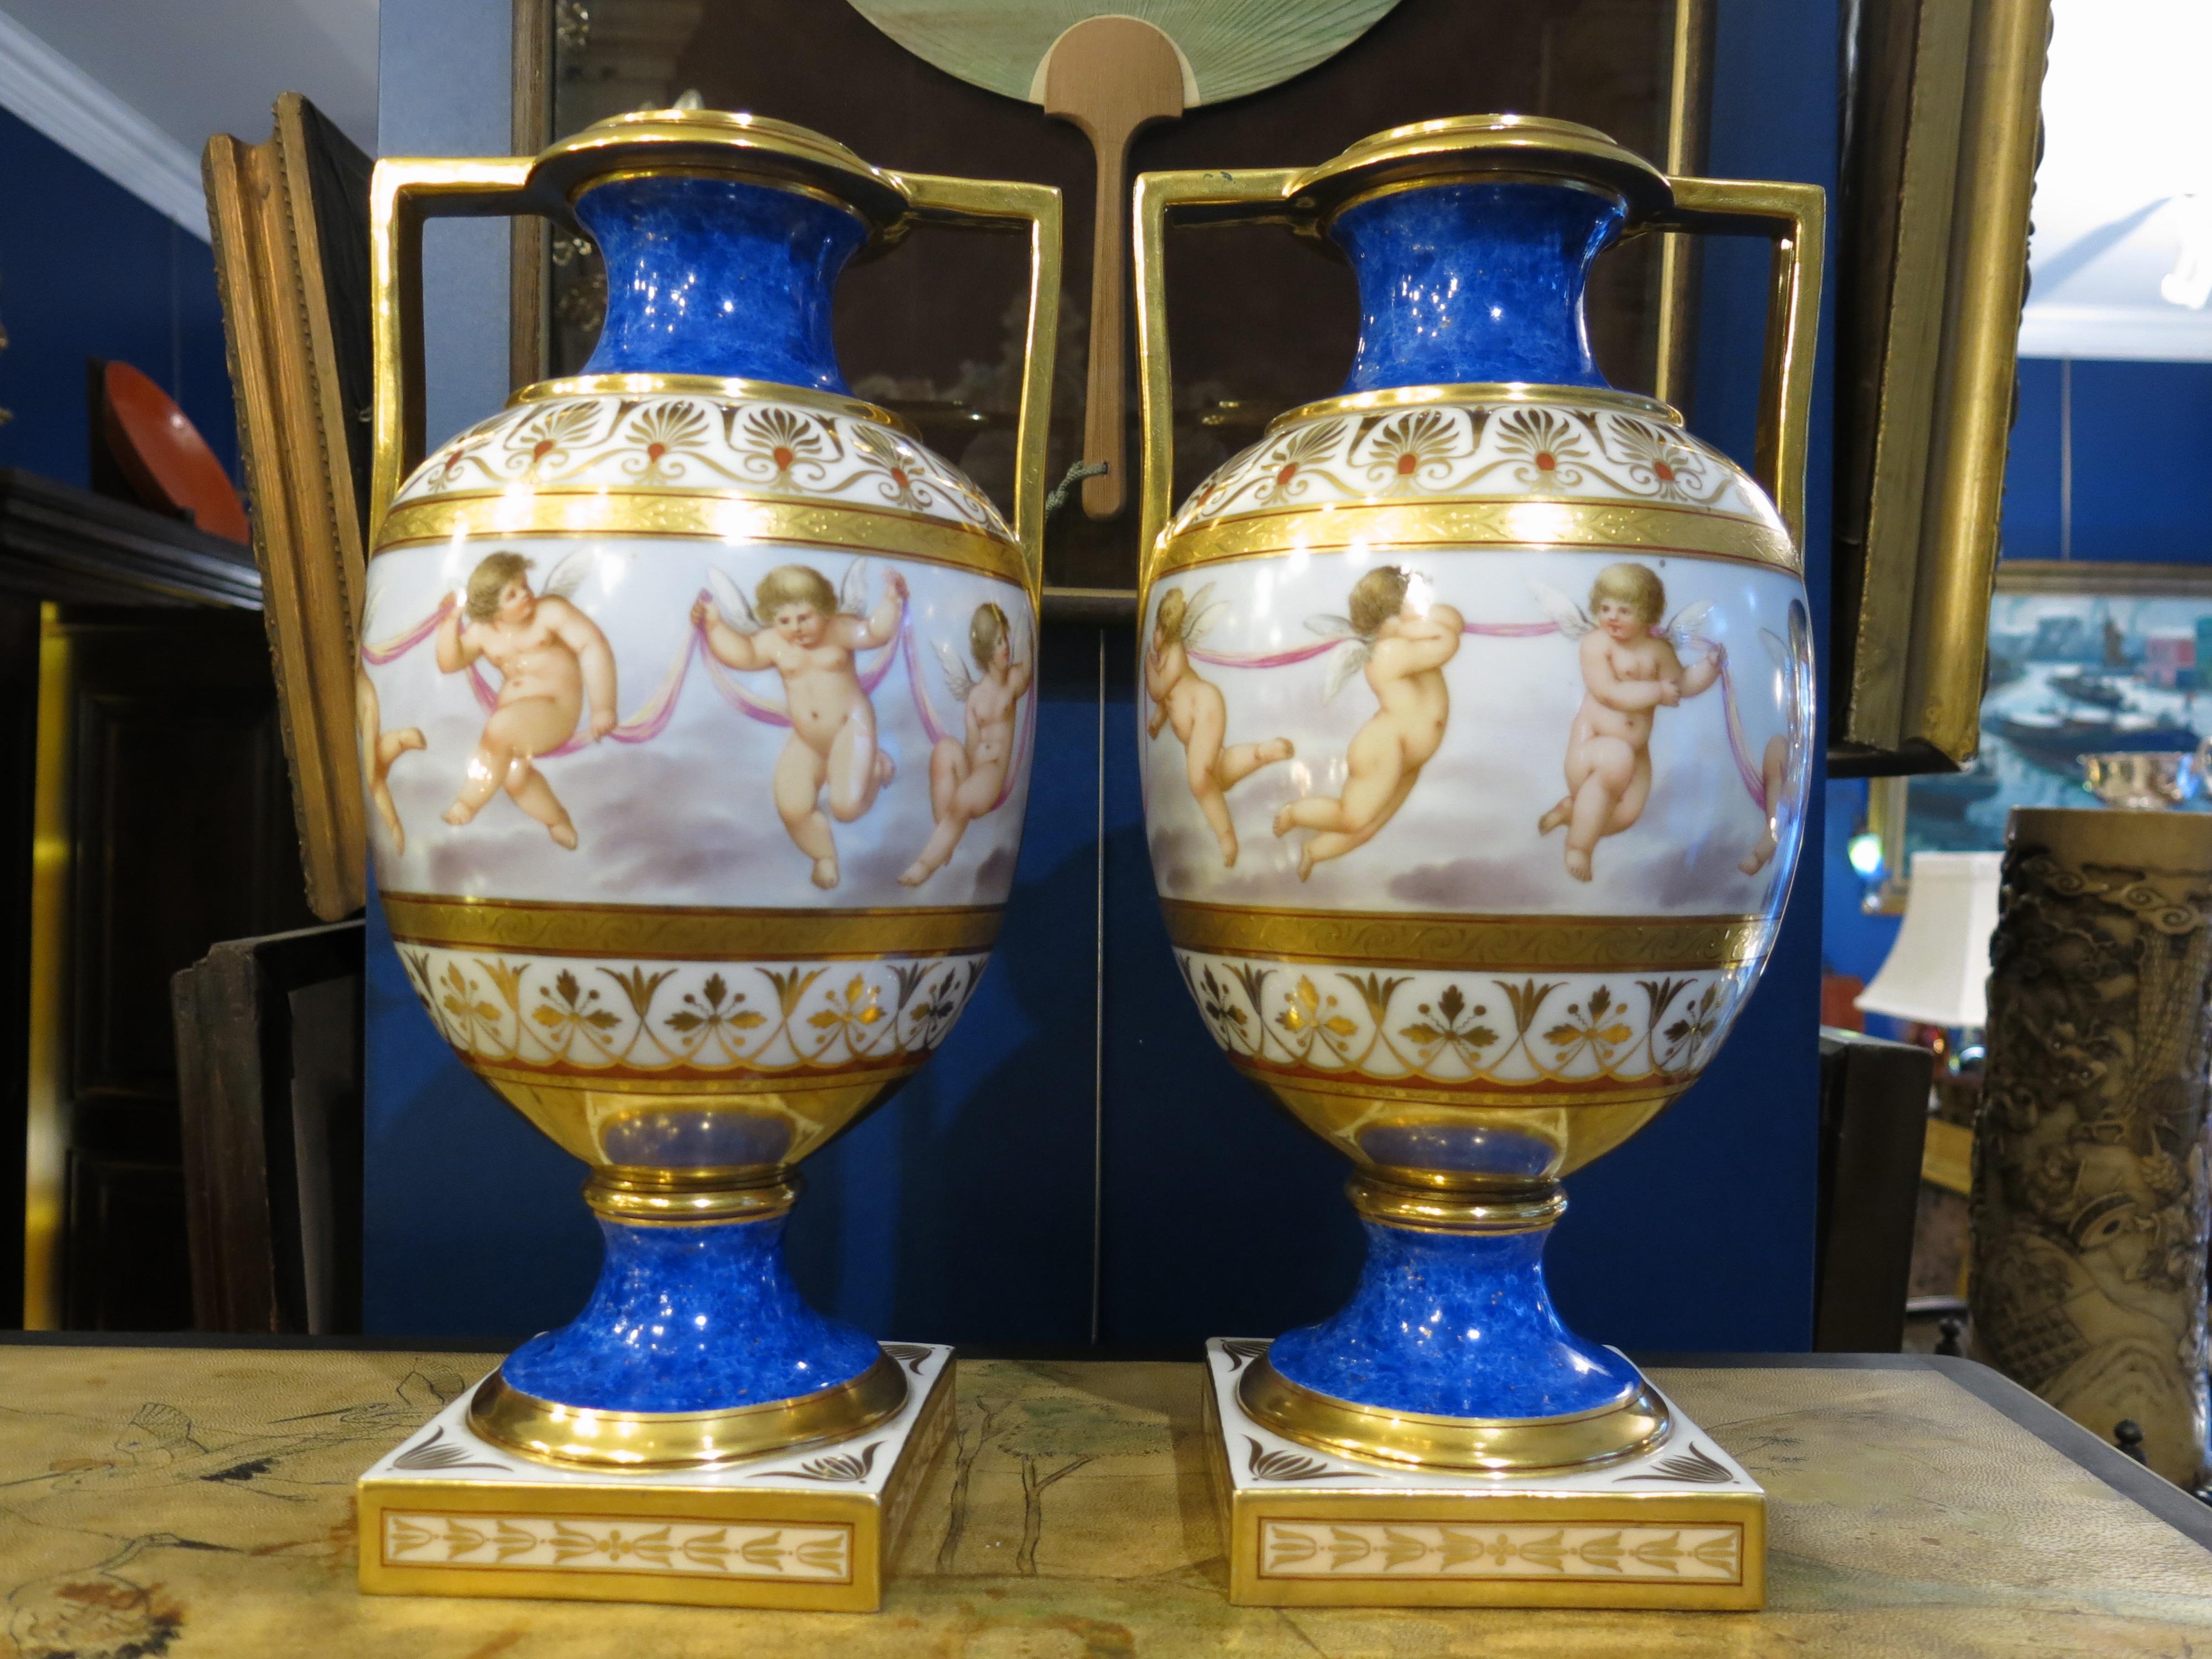 Neoclassical style for this pair of KPM porcelain vases in blue and gold colors with florals and querubines motifs. Signed under the base. Very good condition.
We export worldwide.